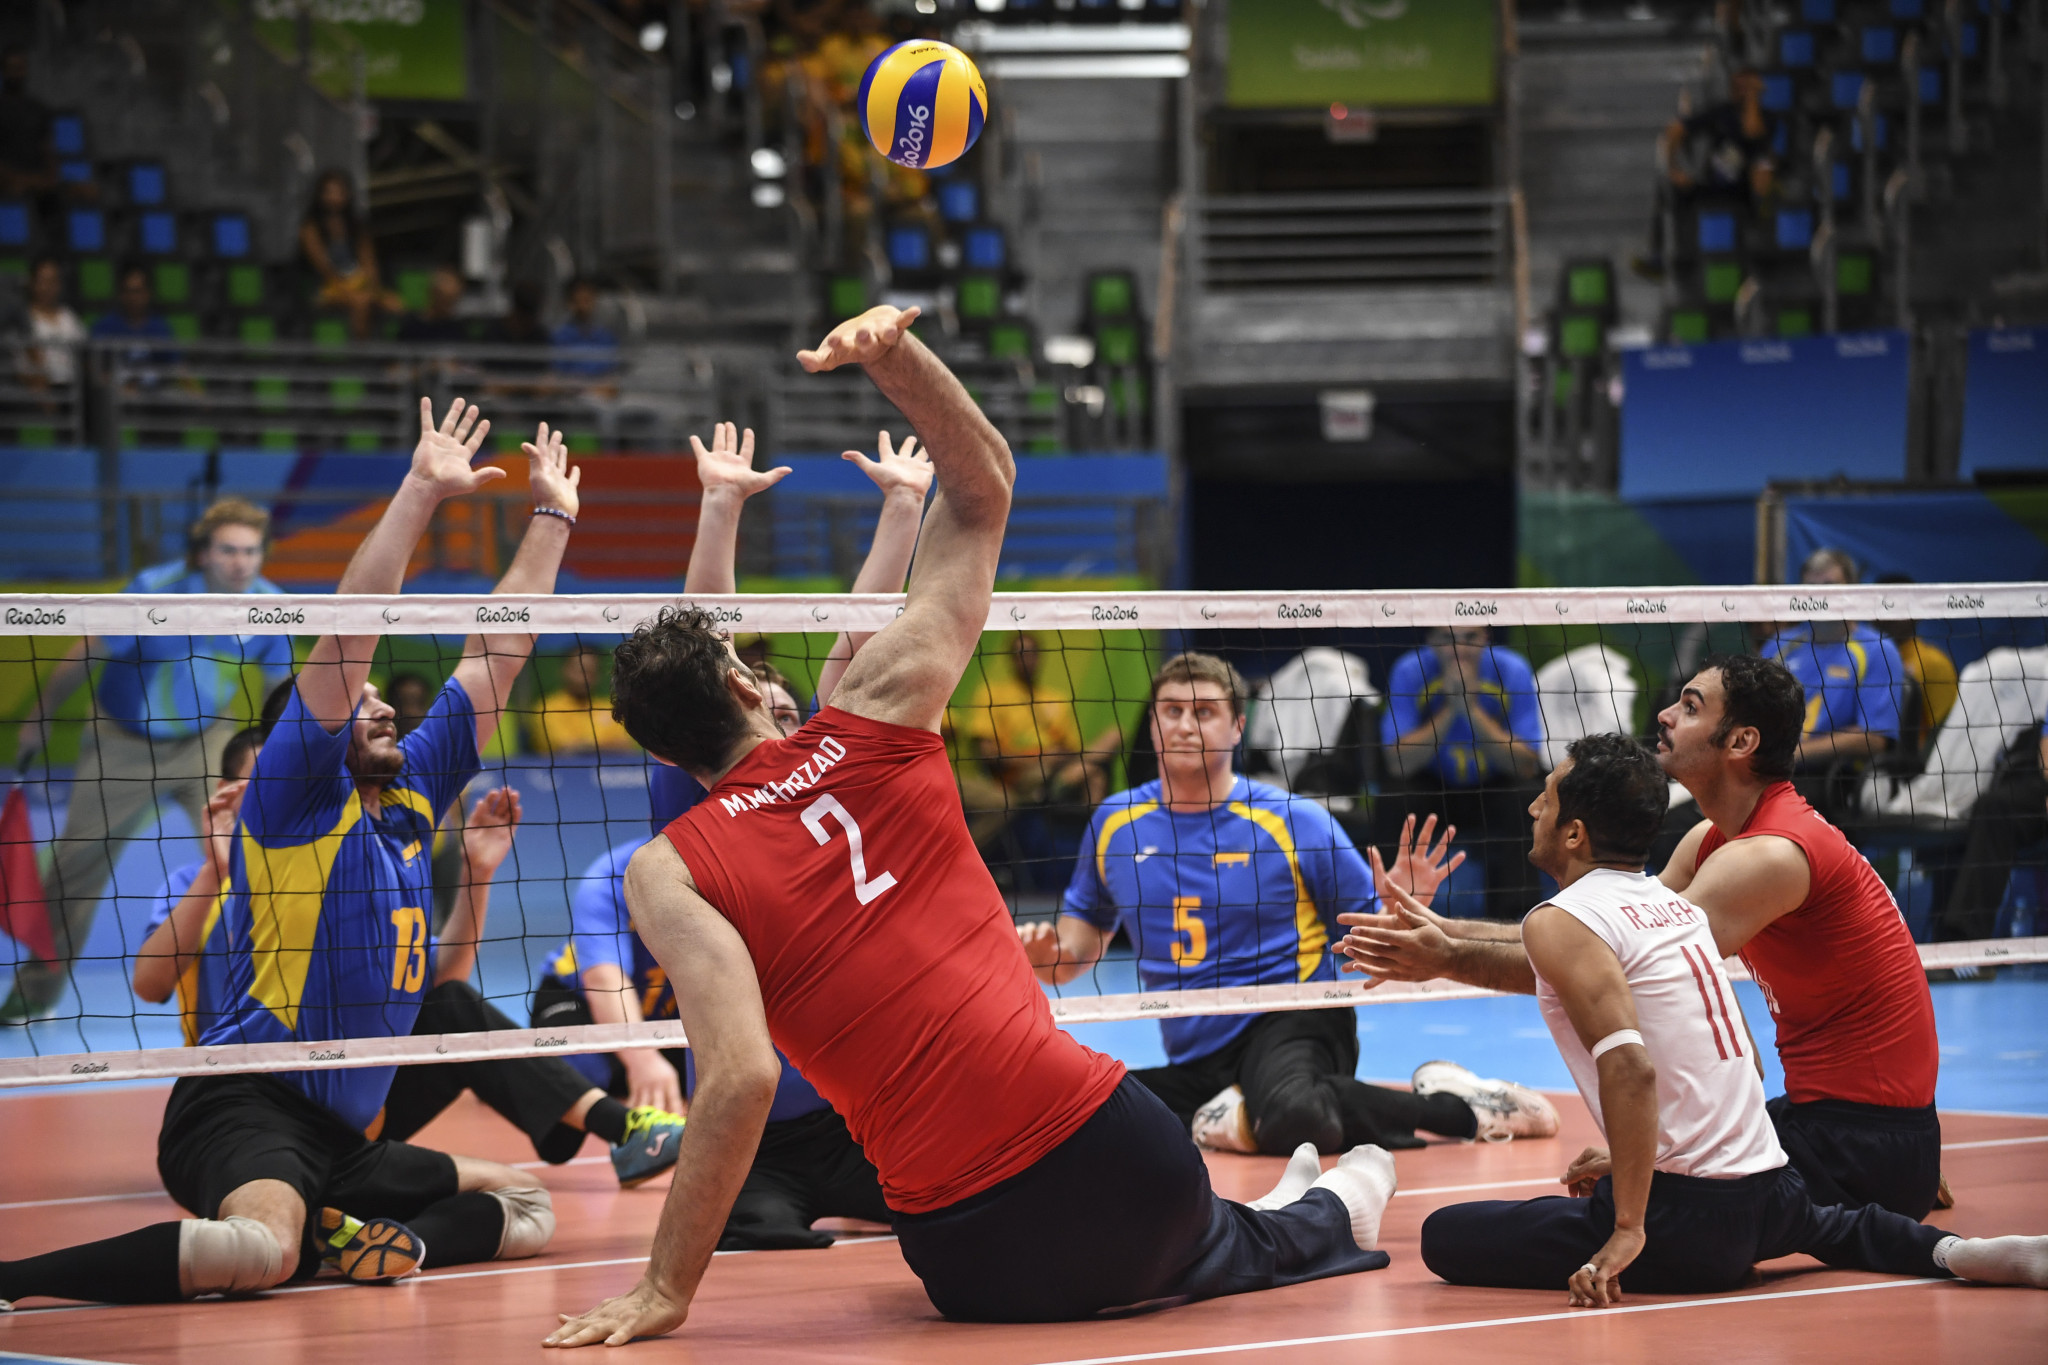 Sitting volleyball was one of the key topics of discussion while Couzner was in Italy ©Getty Images